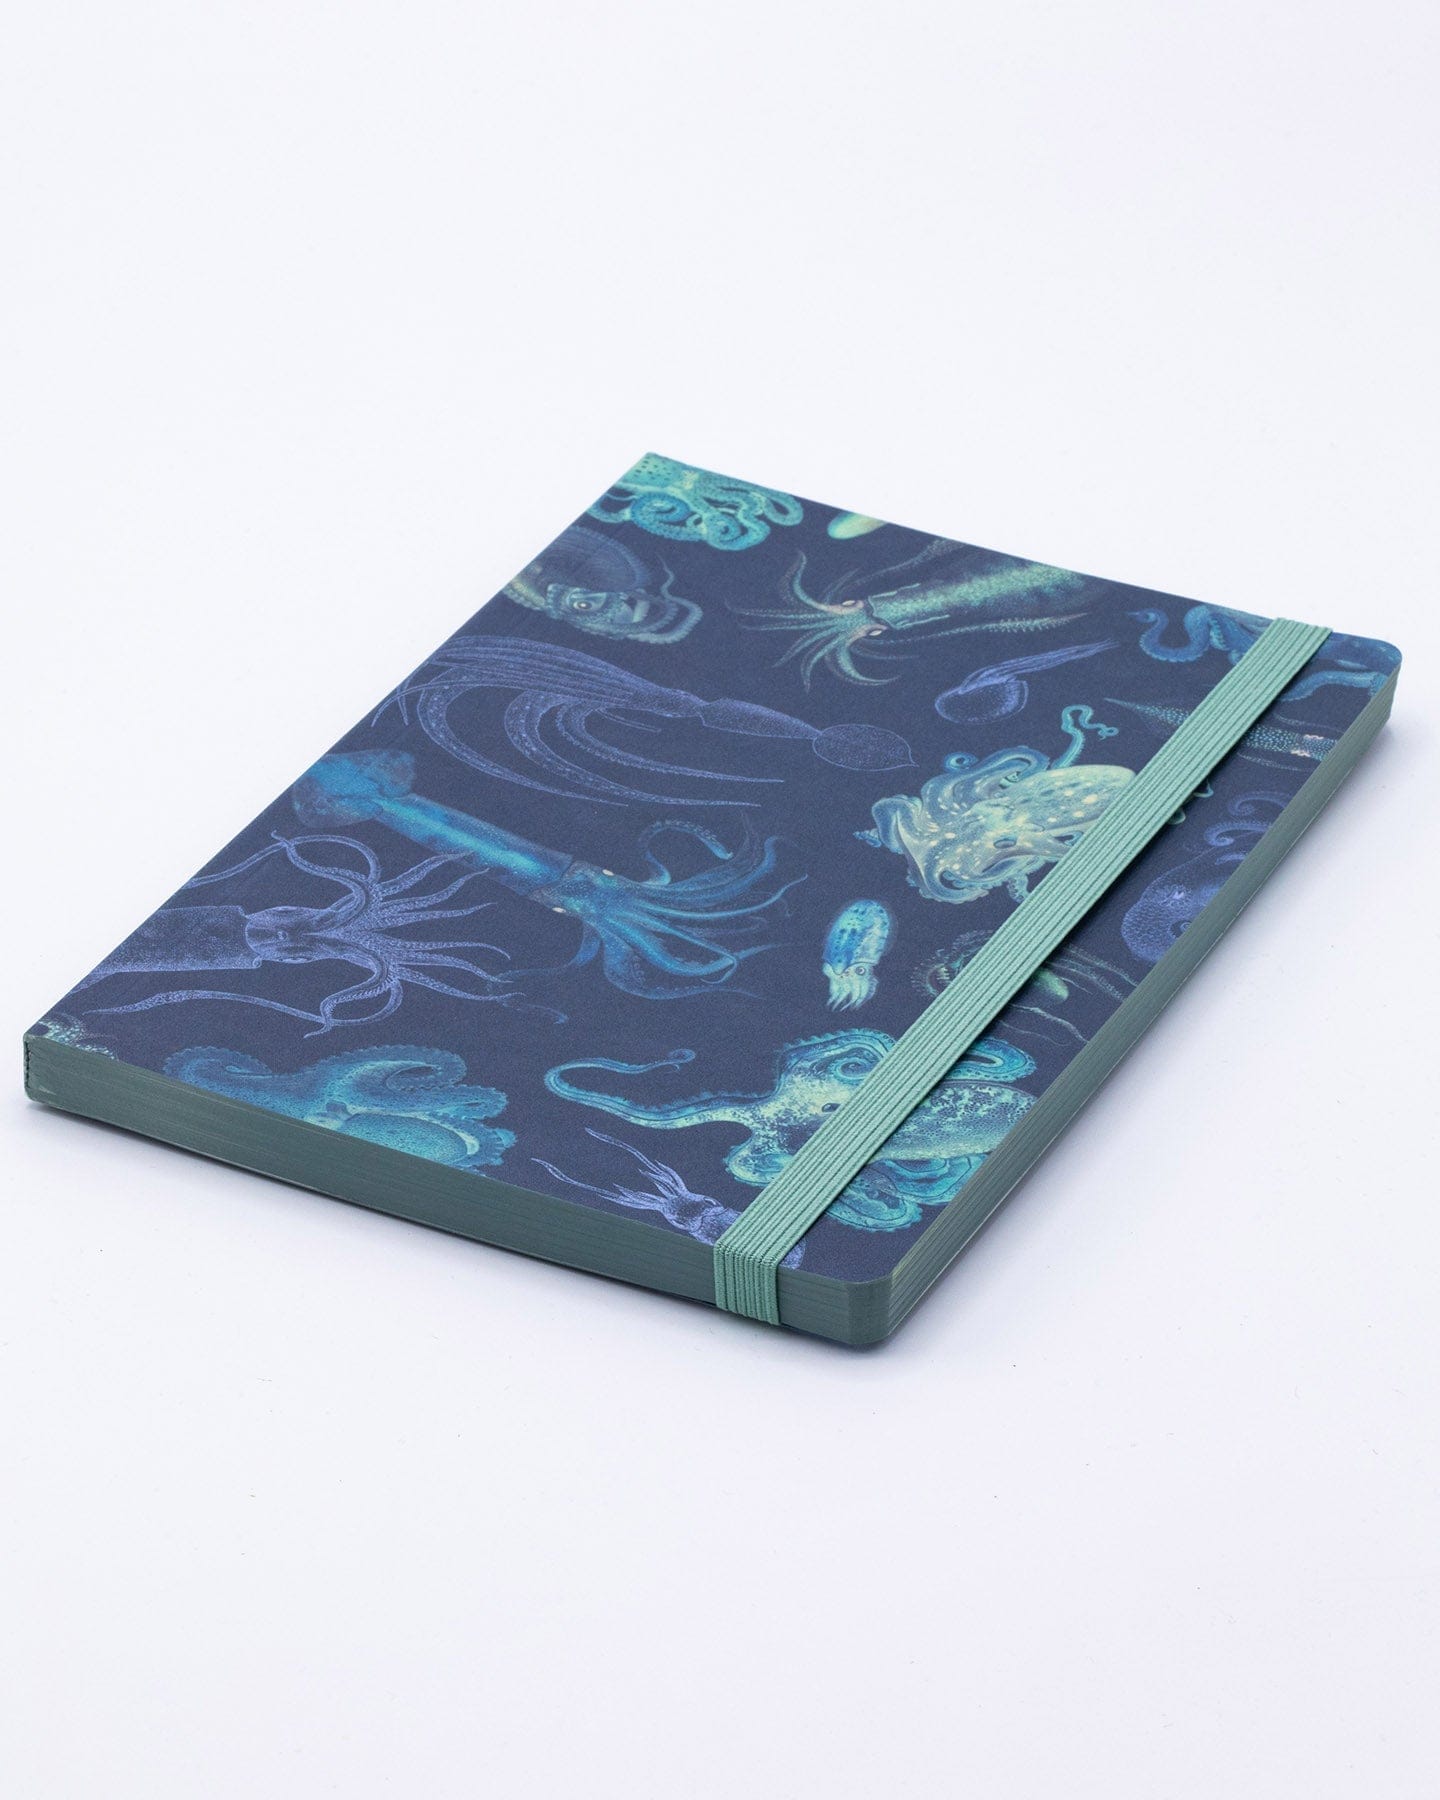 Sea Monsters: Octopus & Squid A5 Softcover Cognitive Surplus